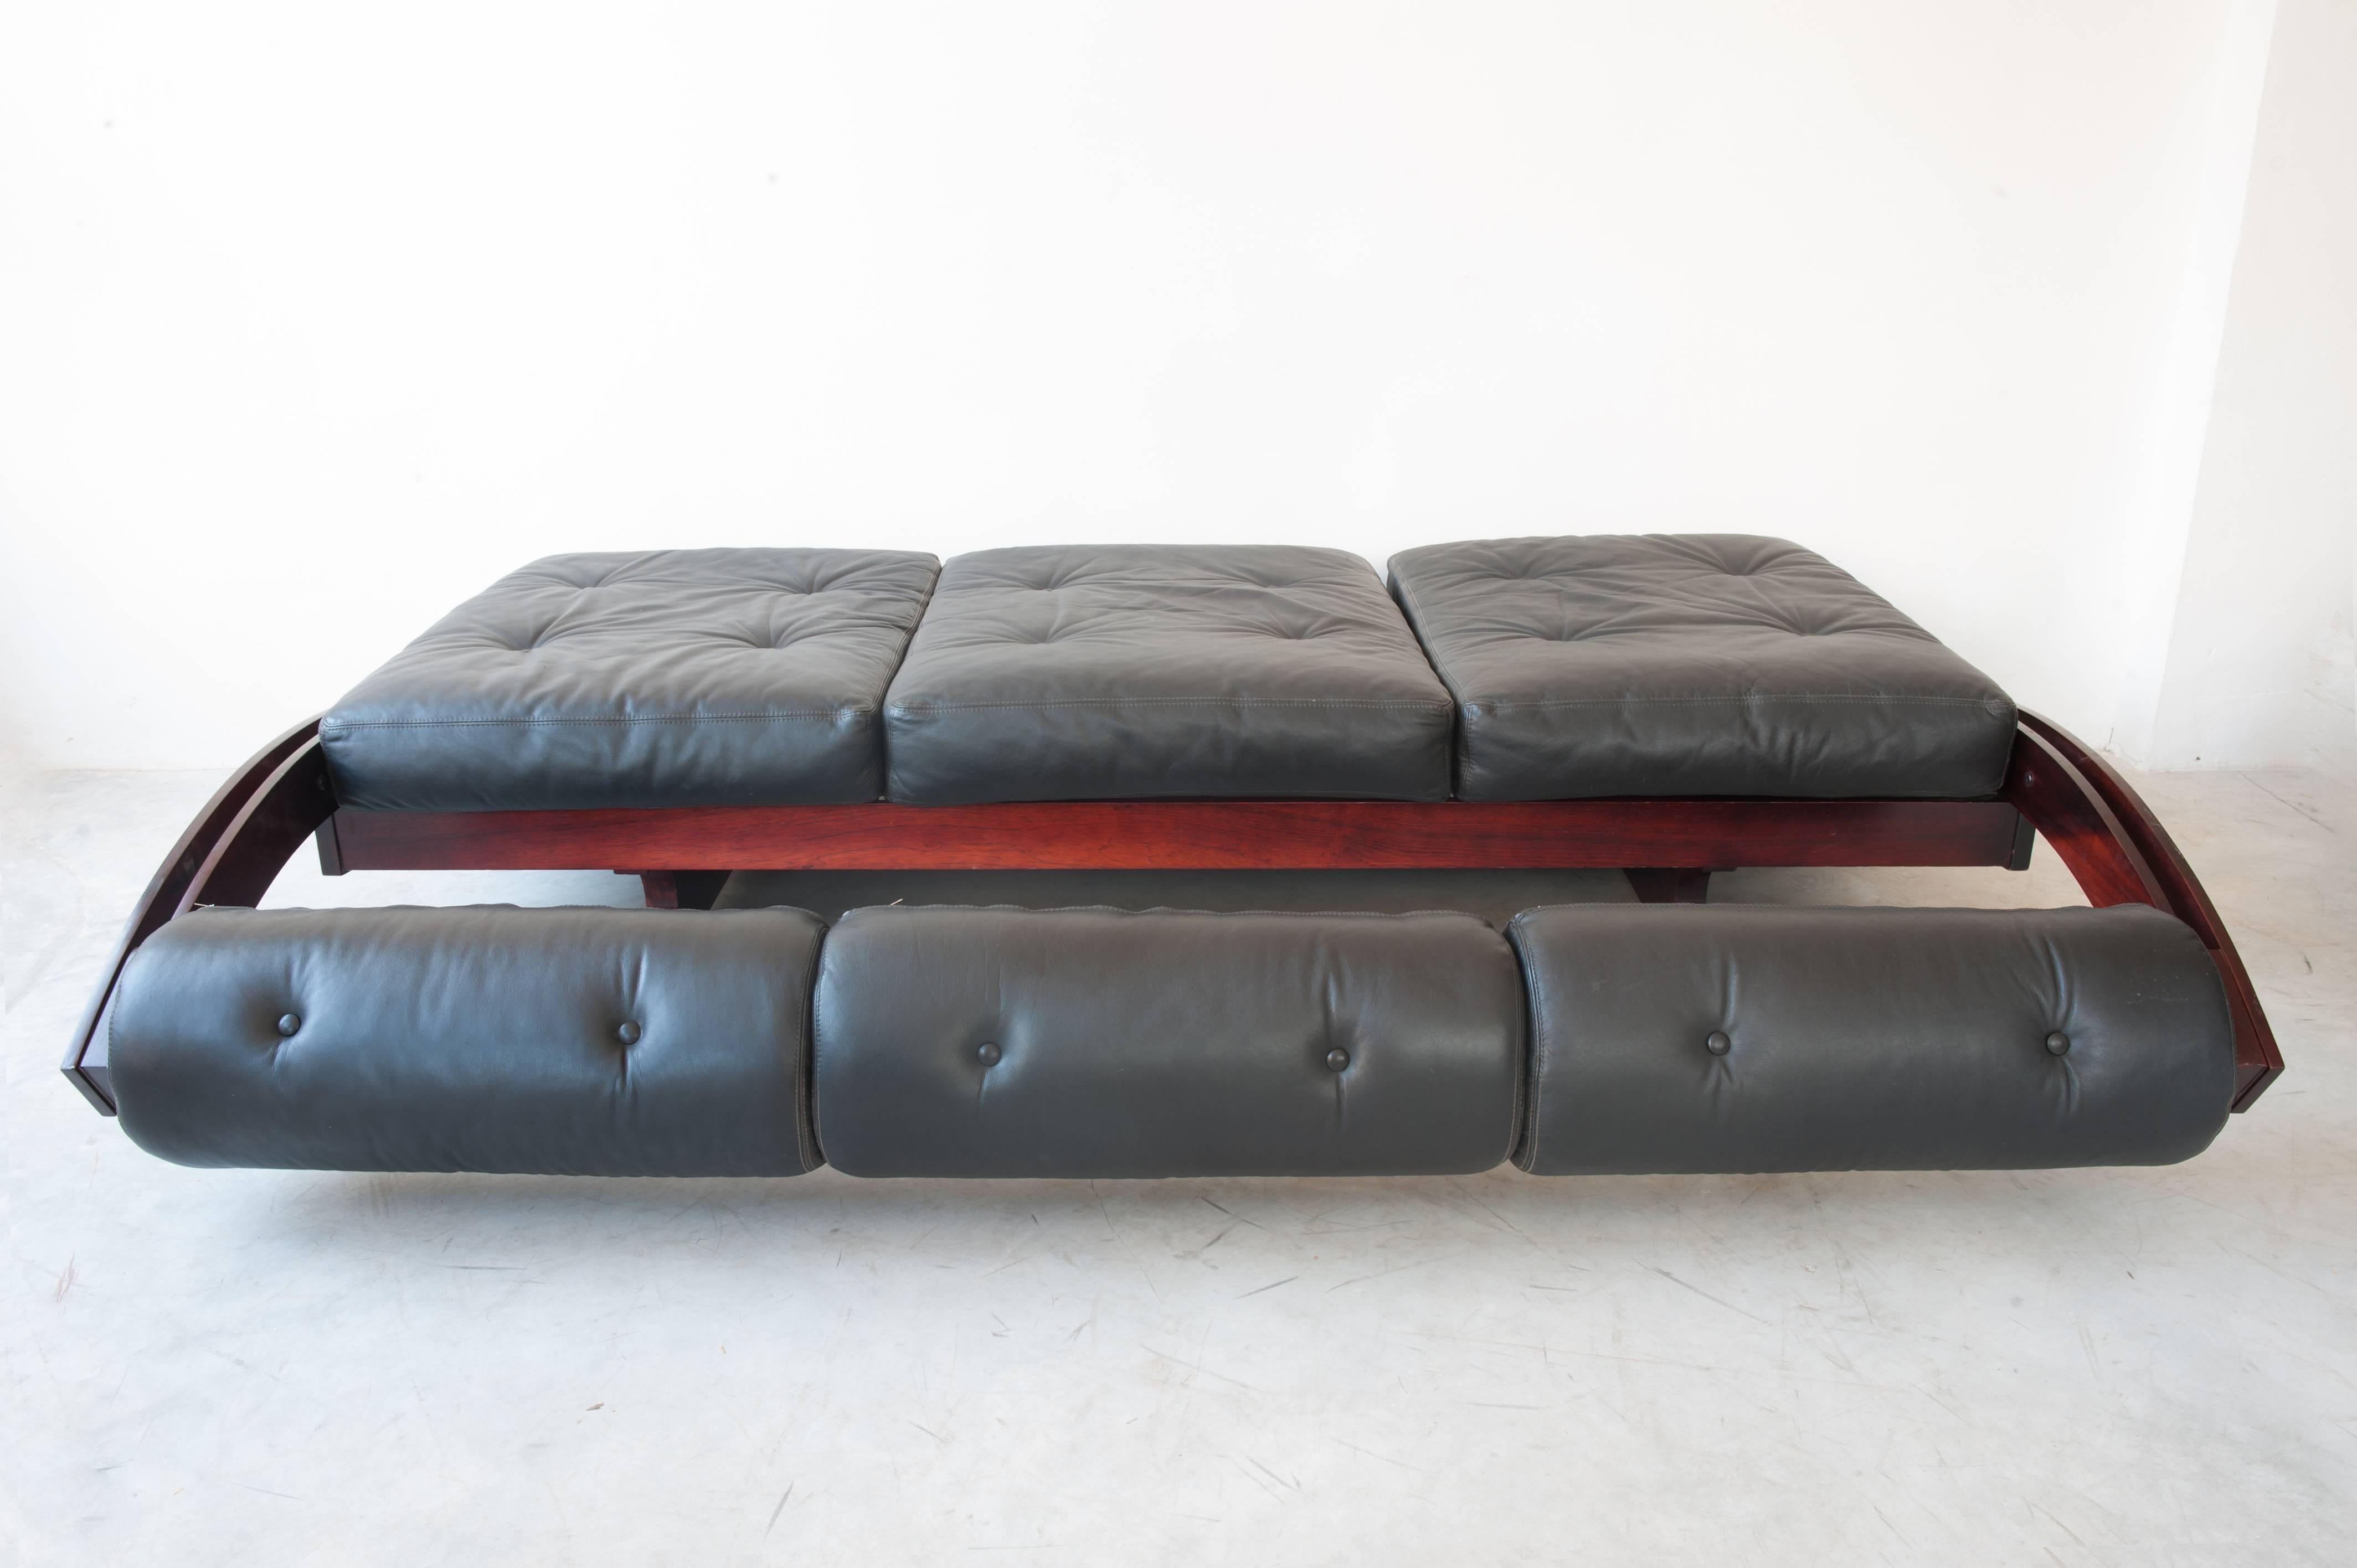 Mid-Century Modern Beautiful GS-195 Daybed-Sofa Designed by Gianni Songia for Sormani, Italy, 1963